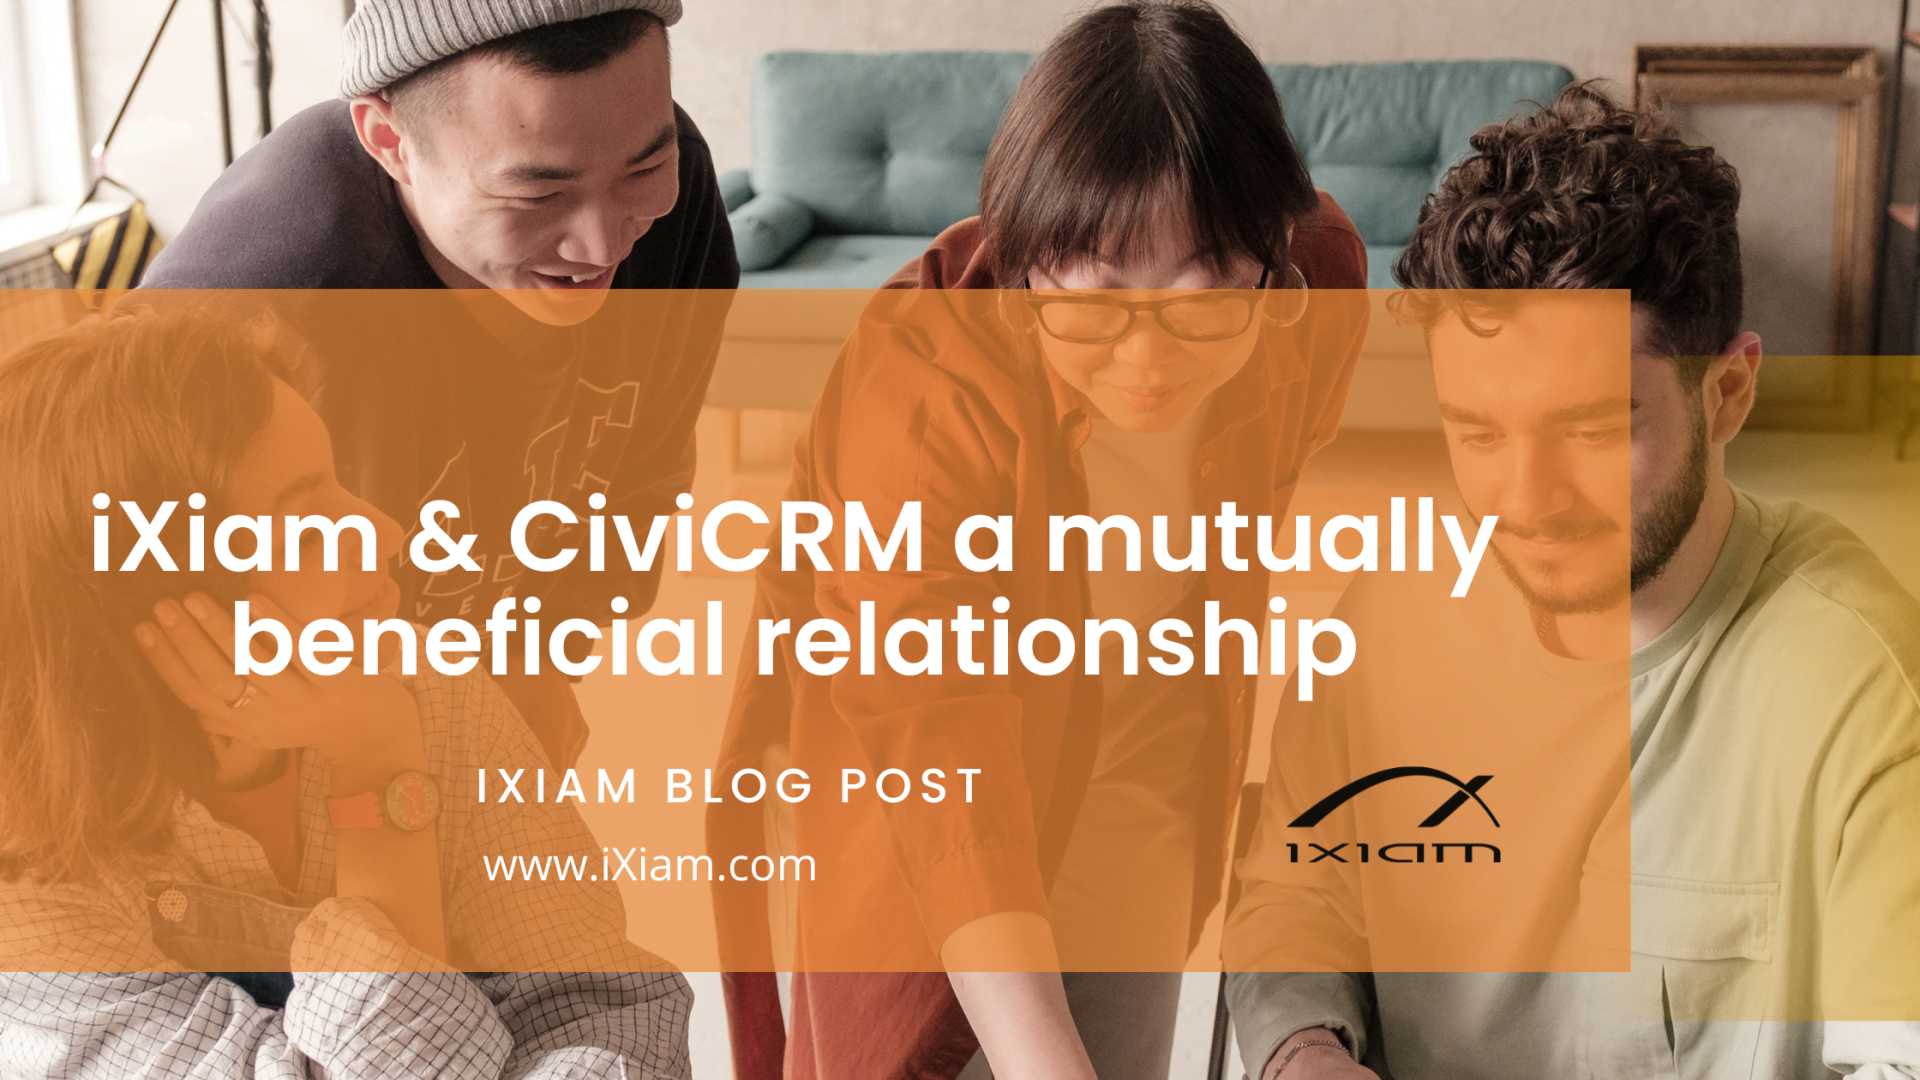 Ixiam and civicrm collaborate in the continuous improvement of free and open source software that facilitates day to day management in nonprofit organizations